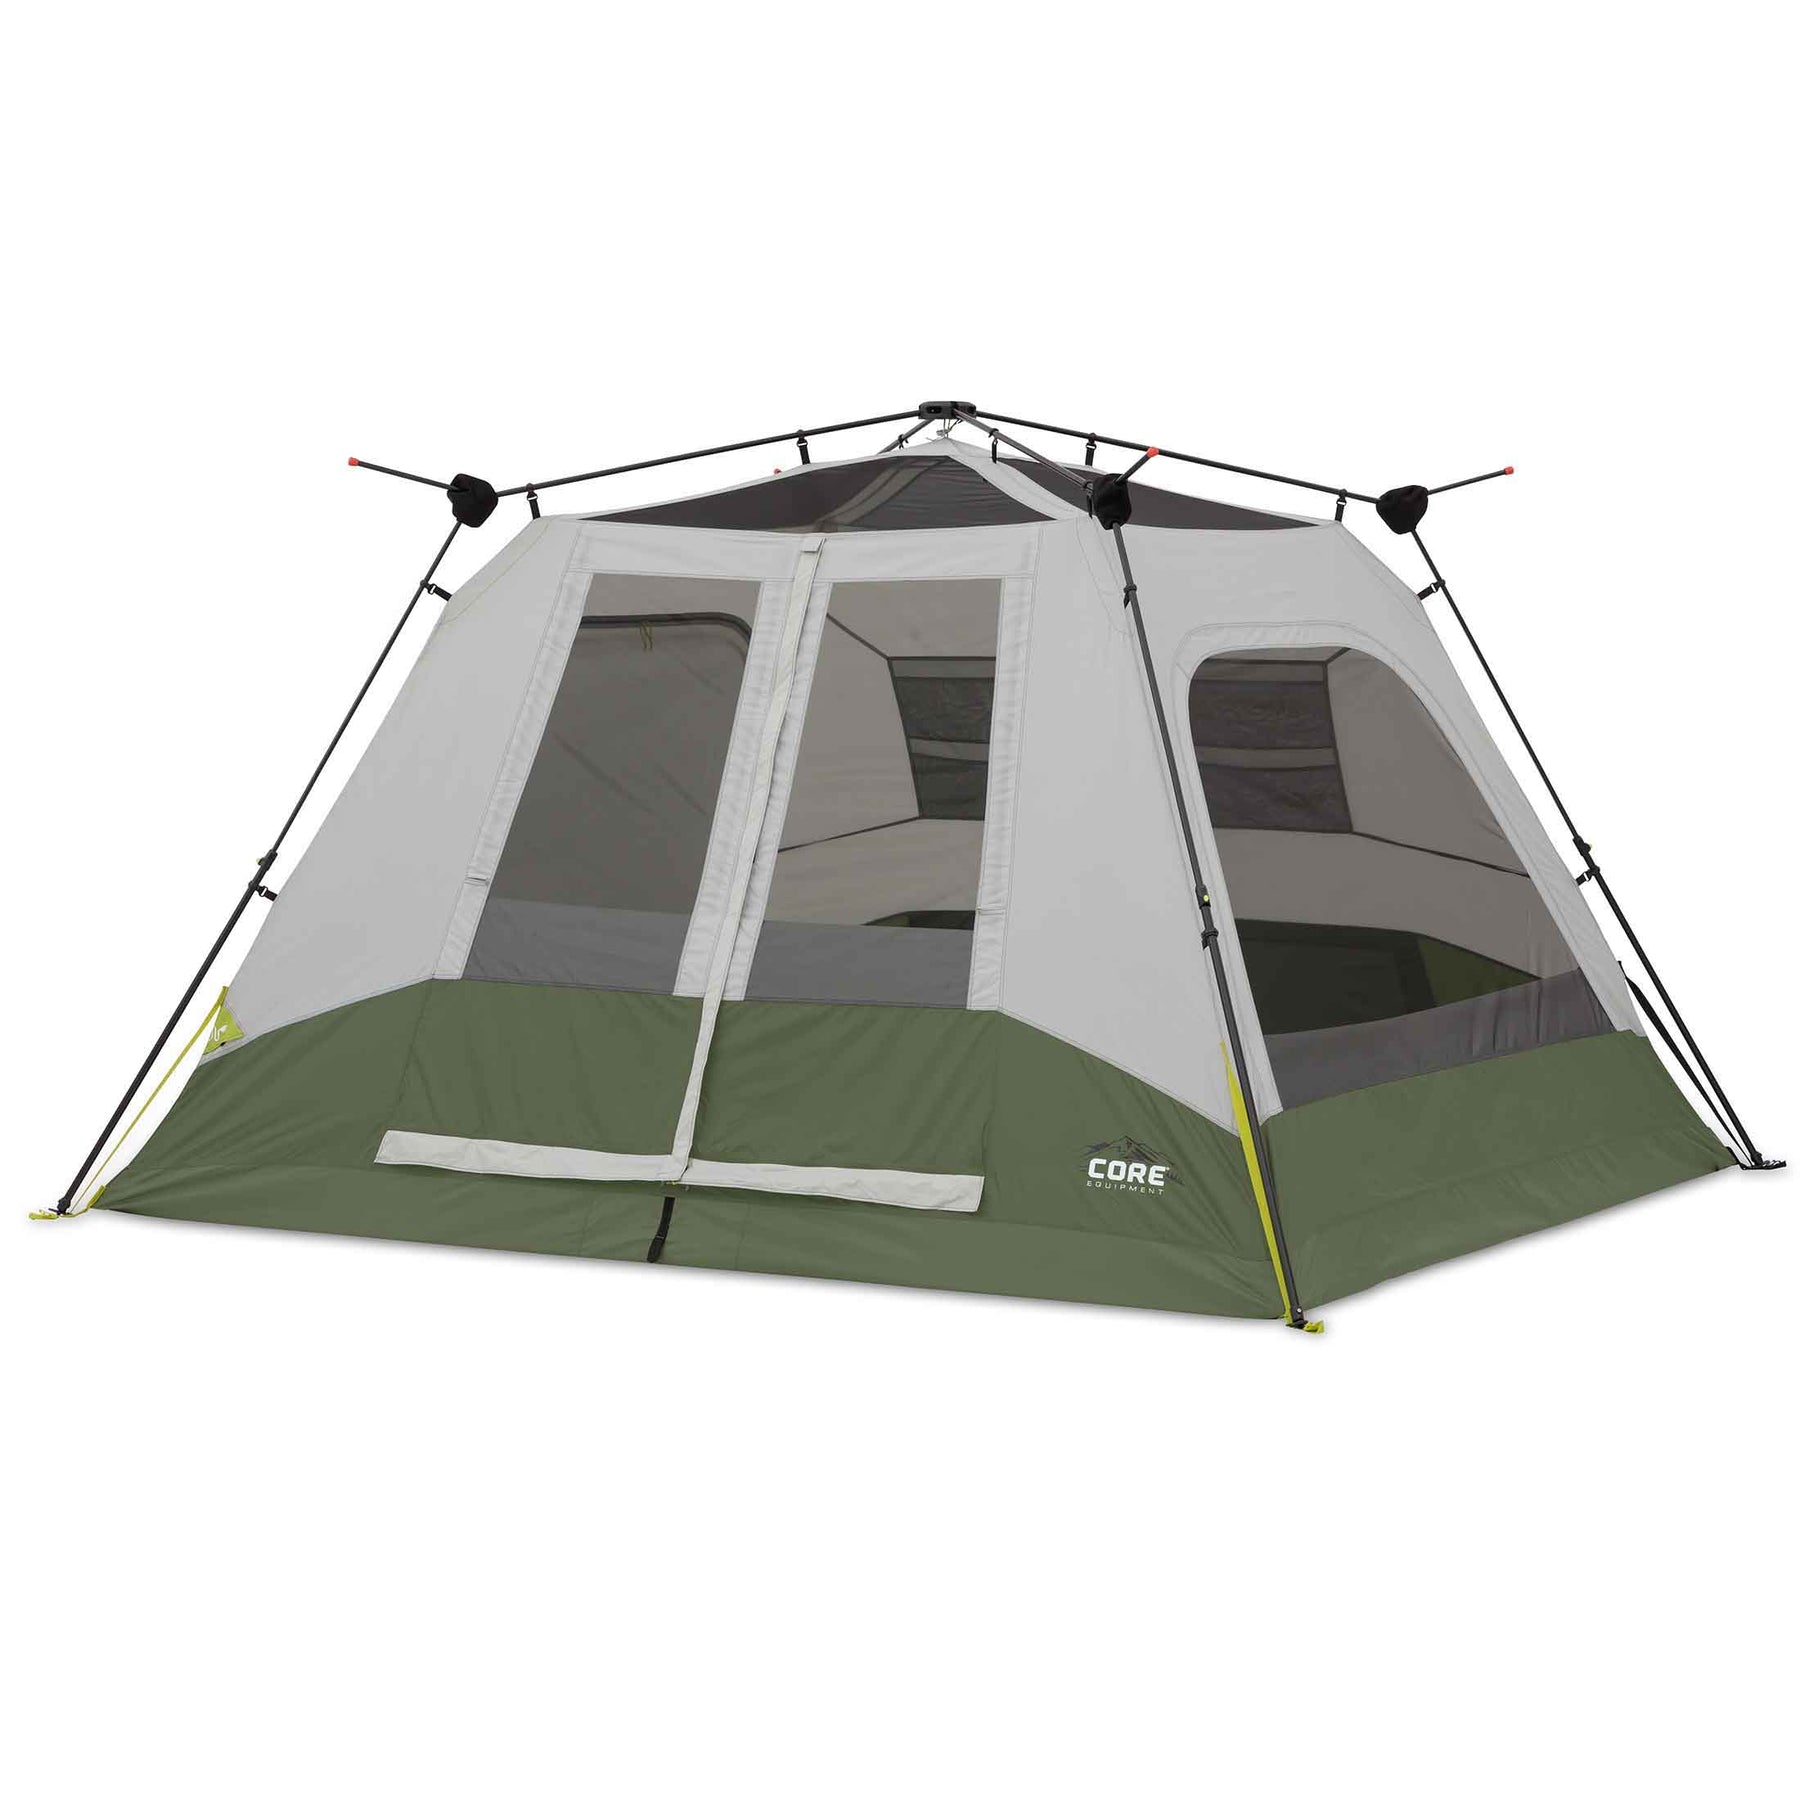 CORE® Equipment 6 Person with Screen Room Straight Wall Cabin Tent